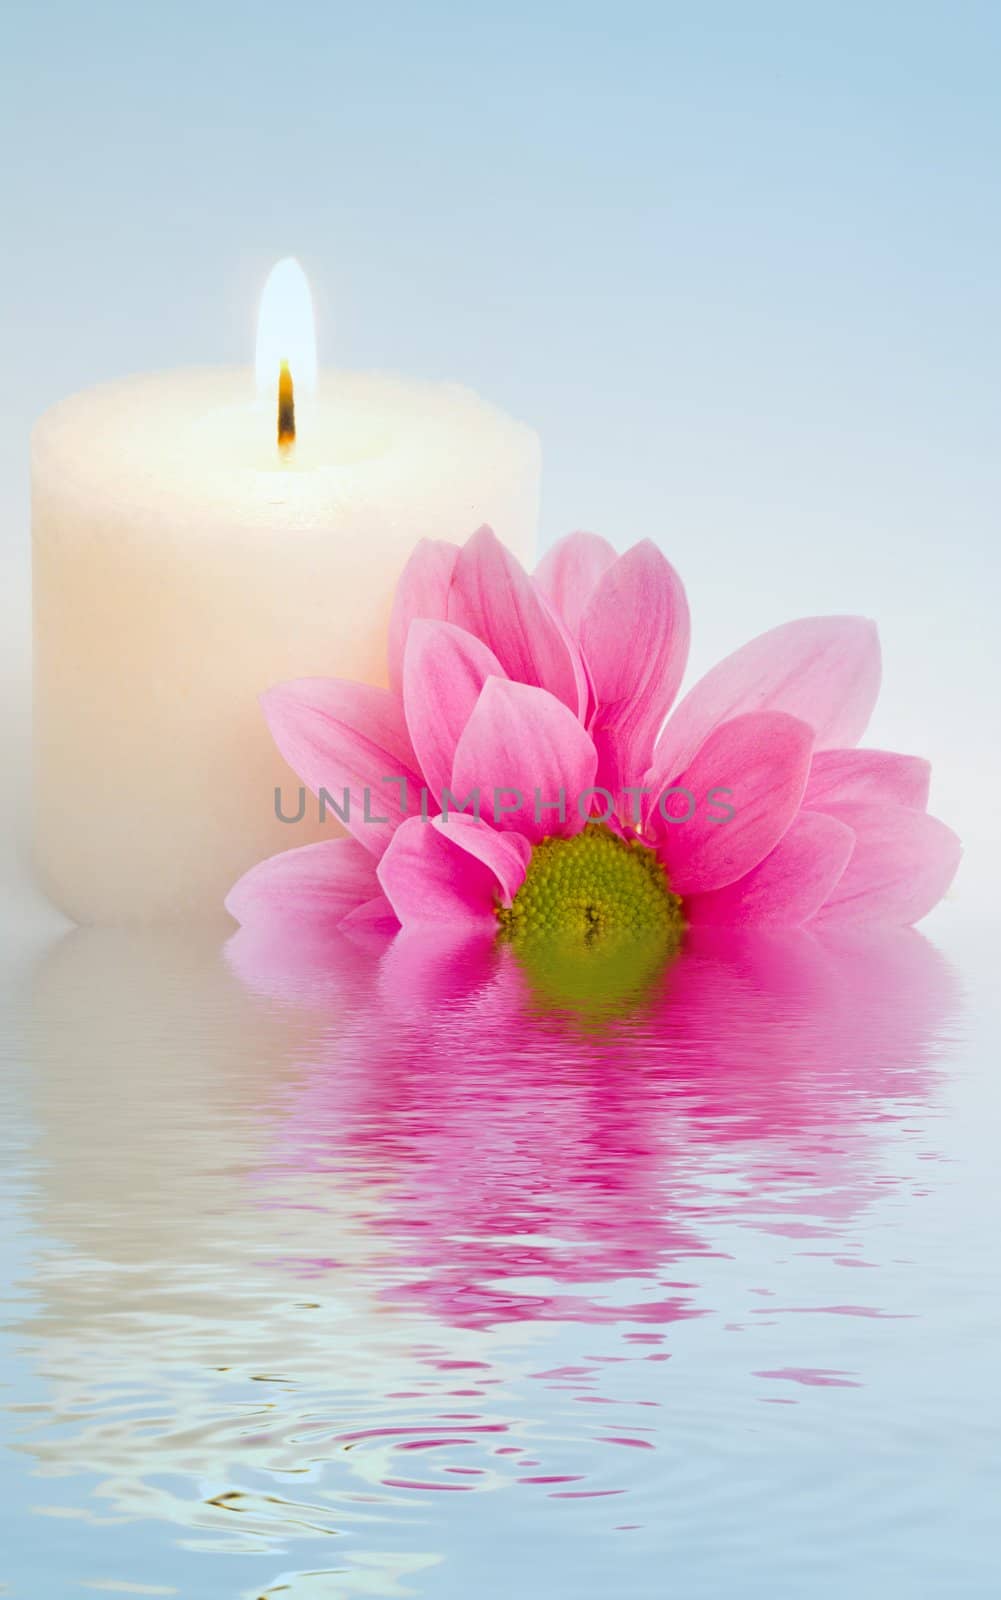 Flower and candle in water by velkol